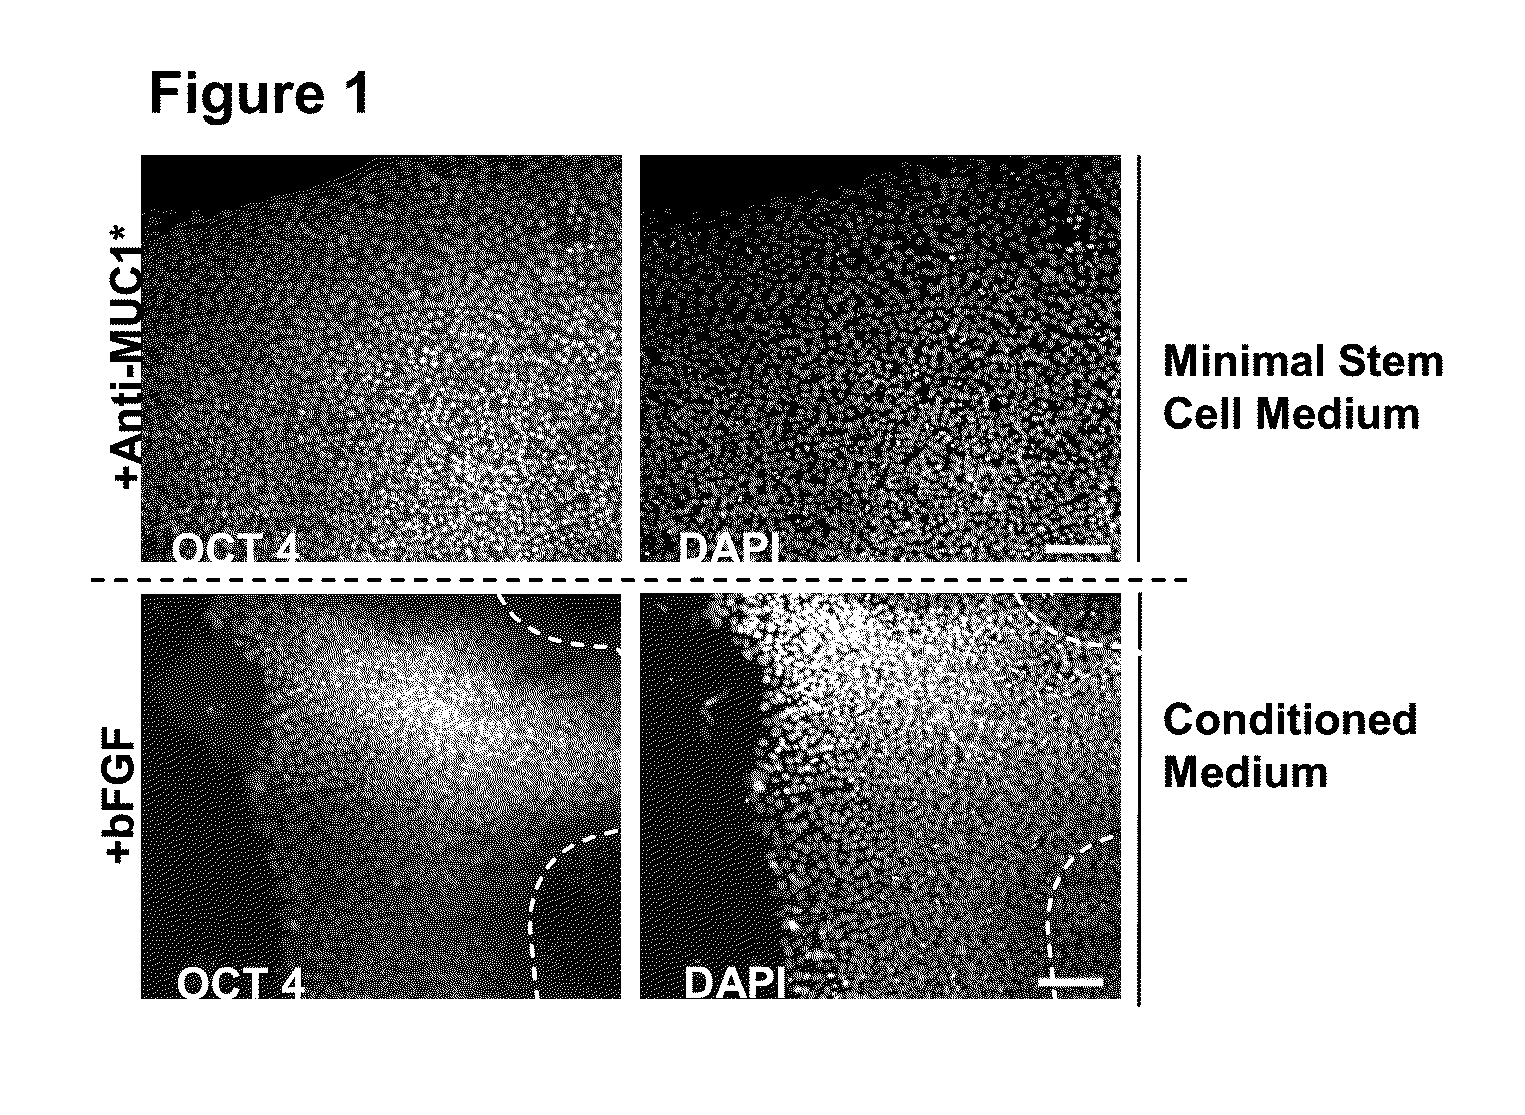 Methods for culturing stem and progenitor cells